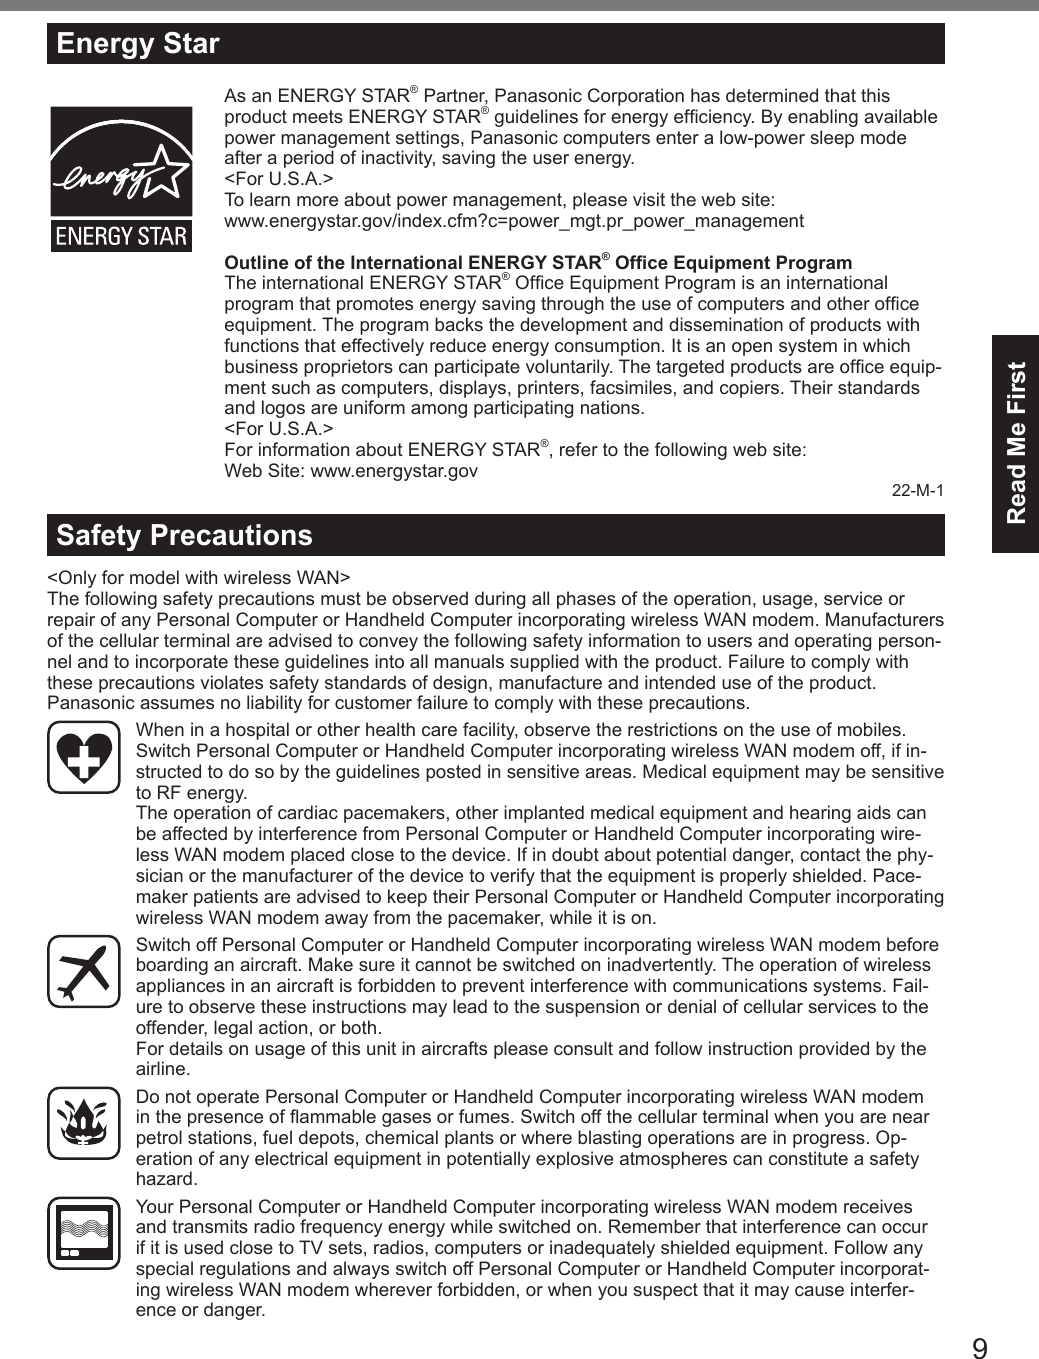 9Read Me First&lt;Only for model with wireless WAN&gt;The following safety precautions must be observed during all phases of the operation, usage, service or repair of any Personal Computer or Handheld Computer incorporating wireless WAN modem. Manufacturers of the cellular terminal are advised to convey the following safety information to users and operating person-nel and to incorporate these guidelines into all manuals supplied with the product. Failure to comply with these precautions violates safety standards of design, manufacture and intended use of the product. Panasonic assumes no liability for customer failure to comply with these precautions.  When in a hospital or other health care facility, observe the restrictions on the use of mobiles. Switch Personal Computer or Handheld Computer incorporating wireless WAN modem off, if in-structed to do so by the guidelines posted in sensitive areas. Medical equipment may be sensitive to RF energy.   The operation of cardiac pacemakers, other implanted medical equipment and hearing aids can be affected by interference from Personal Computer or Handheld Computer incorporating wire-less WAN modem placed close to the device. If in doubt about potential danger, contact the phy-sician or the manufacturer of the device to verify that the equipment is properly shielded. Pace-maker patients are advised to keep their Personal Computer or Handheld Computer incorporating wireless WAN modem away from the pacemaker, while it is on.  Switch off Personal Computer or Handheld Computer incorporating wireless WAN modem before boarding an aircraft. Make sure it cannot be switched on inadvertently. The operation of wireless appliances in an aircraft is forbidden to prevent interference with communications systems. Fail-ure to observe these instructions may lead to the suspension or denial of cellular services to the offender, legal action, or both. For details on usage of this unit in aircrafts please consult and follow instruction provided by the airline.  Do not operate Personal Computer or Handheld Computer incorporating wireless WAN modem in the presence of ammable gases or fumes. Switch off the cellular terminal when you are near petrol stations, fuel depots, chemical plants or where blasting operations are in progress. Op-eration of any electrical equipment in potentially explosive atmospheres can constitute a safety hazard.  Your Personal Computer or Handheld Computer incorporating wireless WAN modem receives and transmits radio frequency energy while switched on. Remember that interference can occur if it is used close to TV sets, radios, computers or inadequately shielded equipment. Follow any special regulations and always switch off Personal Computer or Handheld Computer incorporat-ing wireless WAN modem wherever forbidden, or when you suspect that it may cause interfer-ence or danger.Safety PrecautionsEnergy StarAs an ENERGY STAR® Partner, Panasonic Corporation has determined that this product meets ENERGY STAR® guidelines for energy efciency. By enabling available power management settings, Panasonic computers enter a low-power sleep mode after a period of inactivity, saving the user energy.&lt;For U.S.A.&gt;To learn more about power management, please visit the web site:www.energystar.gov/index.cfm?c=power_mgt.pr_power_managementOutline of the International ENERGY STAR® Ofce Equipment ProgramThe international ENERGY STAR® Ofce Equipment Program is an international program that promotes energy saving through the use of computers and other ofce equipment. The program backs the development and dissemination of products with functions that effectively reduce energy consumption. It is an open system in which business proprietors can participate voluntarily. The targeted products are ofce equip-ment such as computers, displays, printers, facsimiles, and copiers. Their standards and logos are uniform among participating nations.&lt;For U.S.A.&gt;For information about ENERGY STAR®, refer to the following web site:Web Site: www.energystar.gov22-M-1